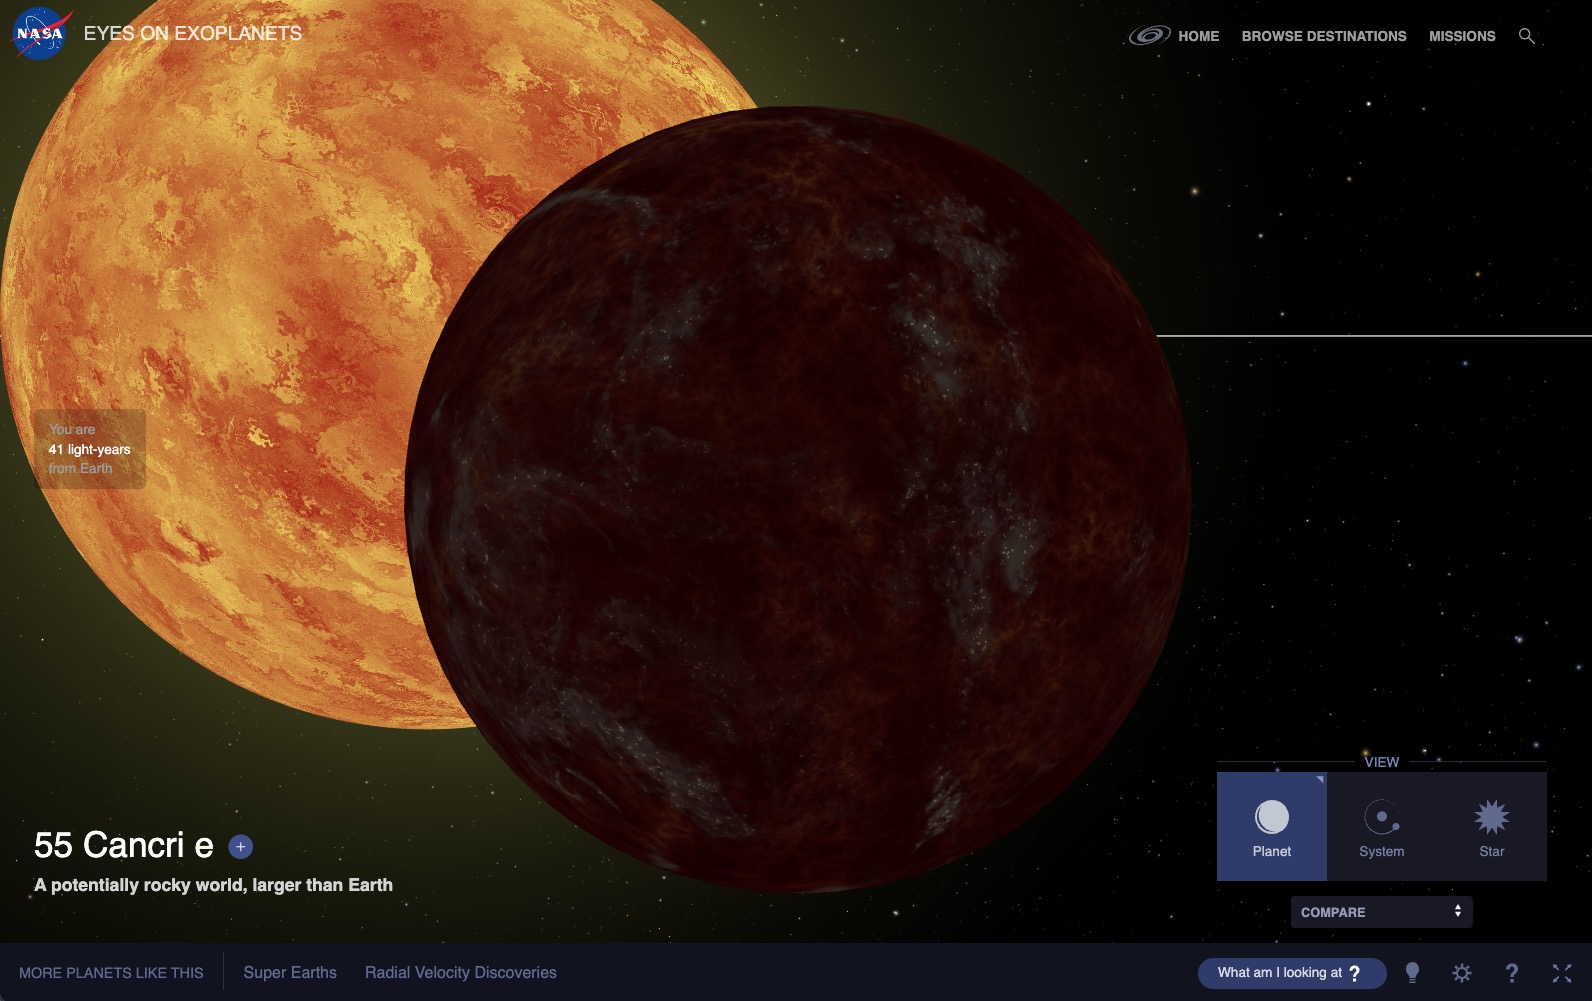 The shadowed side of a lava-encrusted planet faces forward while its glowing organge star looms behind it. Orbit lines and various controls are shown along the sides of the image.